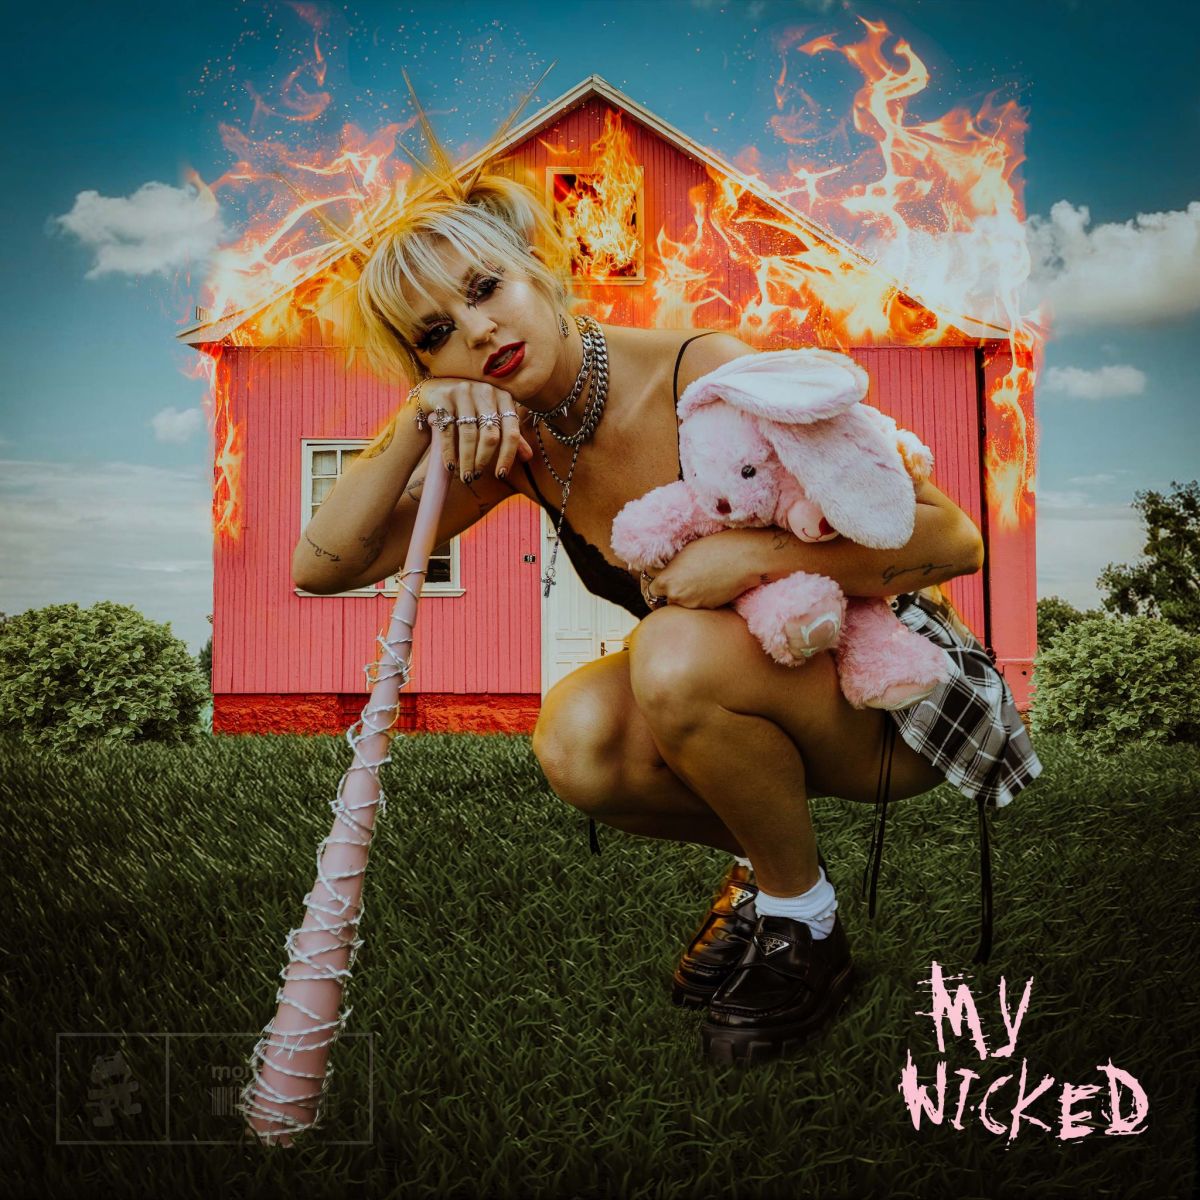 Cover art of GG Magree's single, "My Wicked."